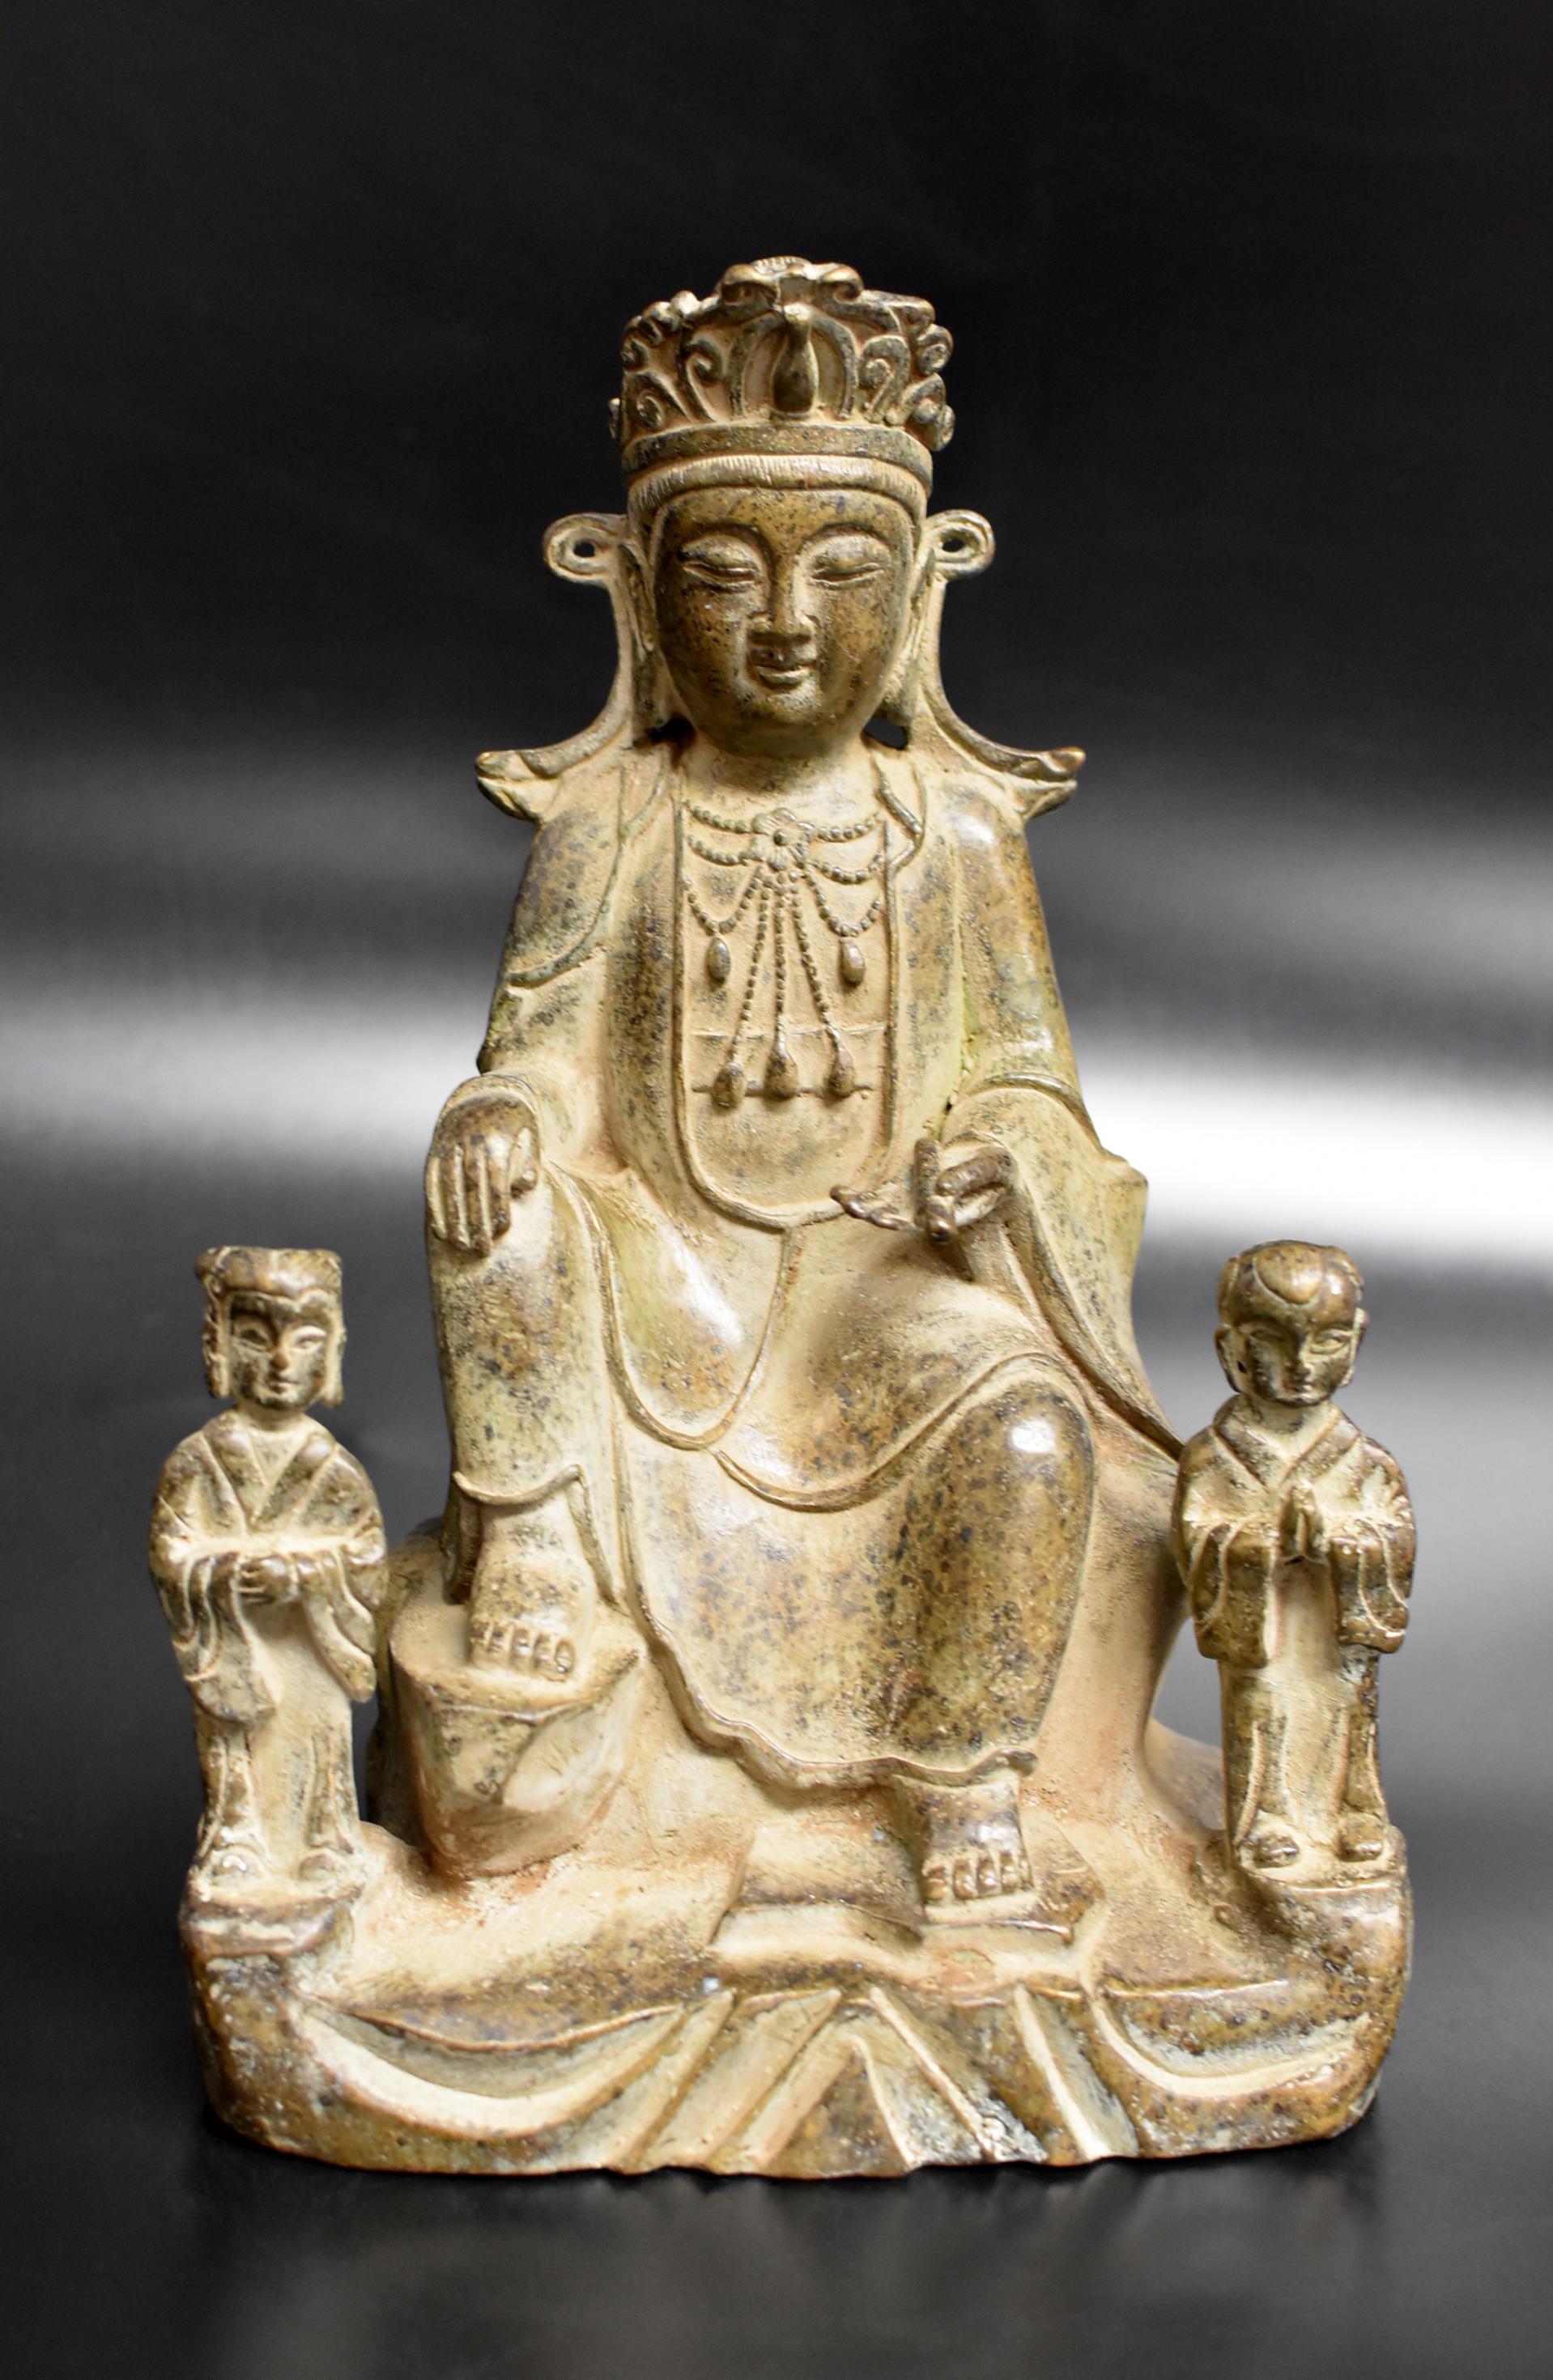 A beautiful antique bronze statue of Buddha as teacher. Seated in rajalilasana (royal ease) on a rock, the hands in bhumisparsha mudra holding a scroll of scripts, wearing a flowing robe draping over the shoulders, revealing a long multi-layered